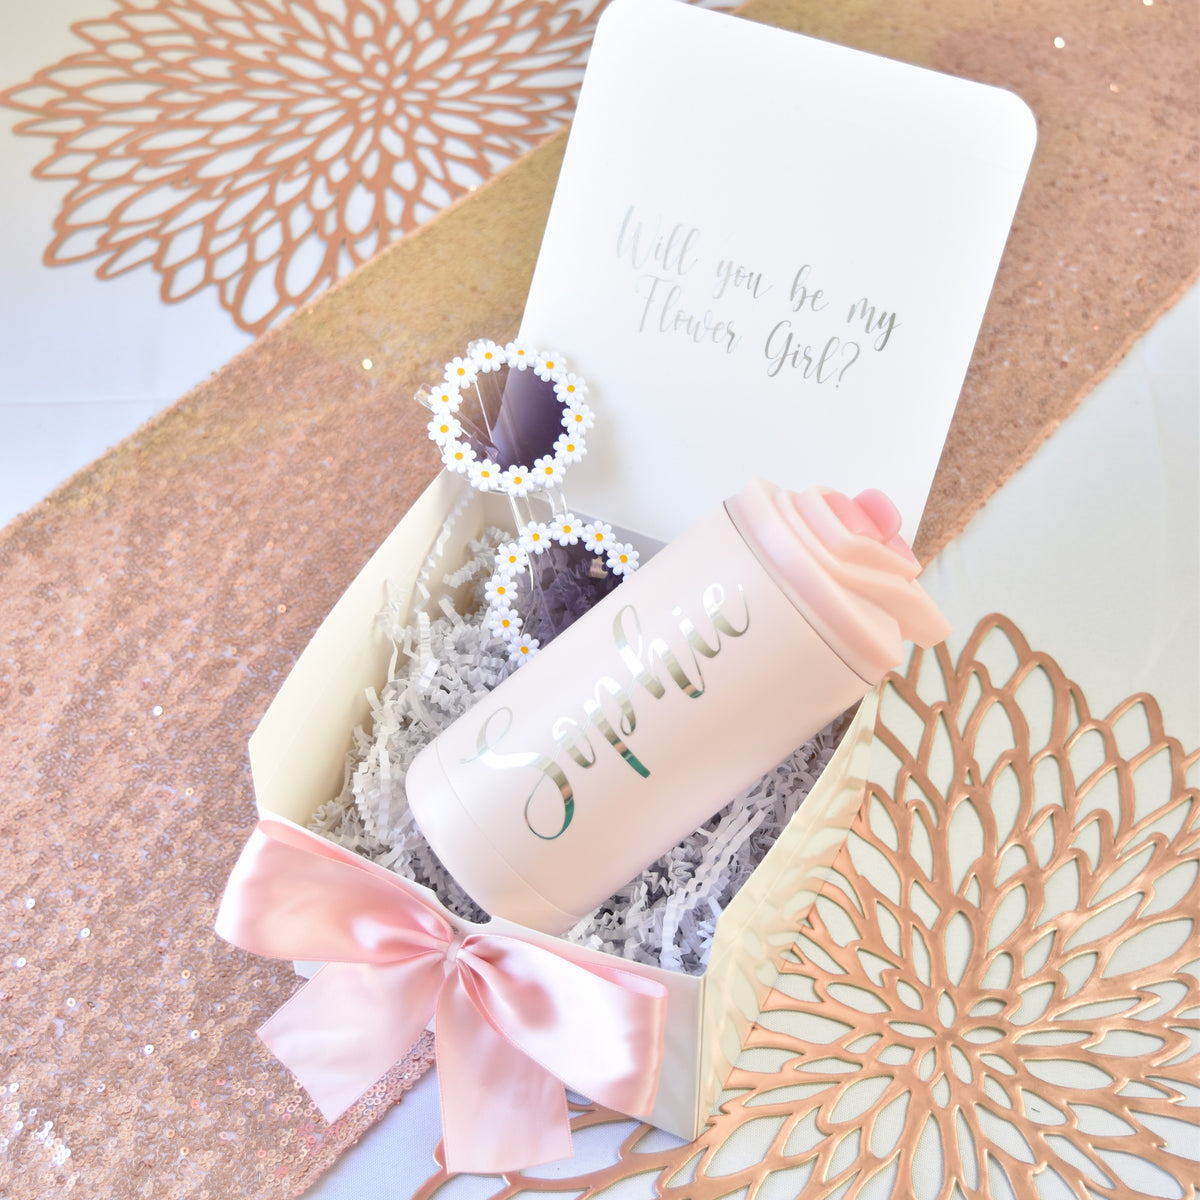 10 Fun and Sweet Gifts for Your Flower Girl